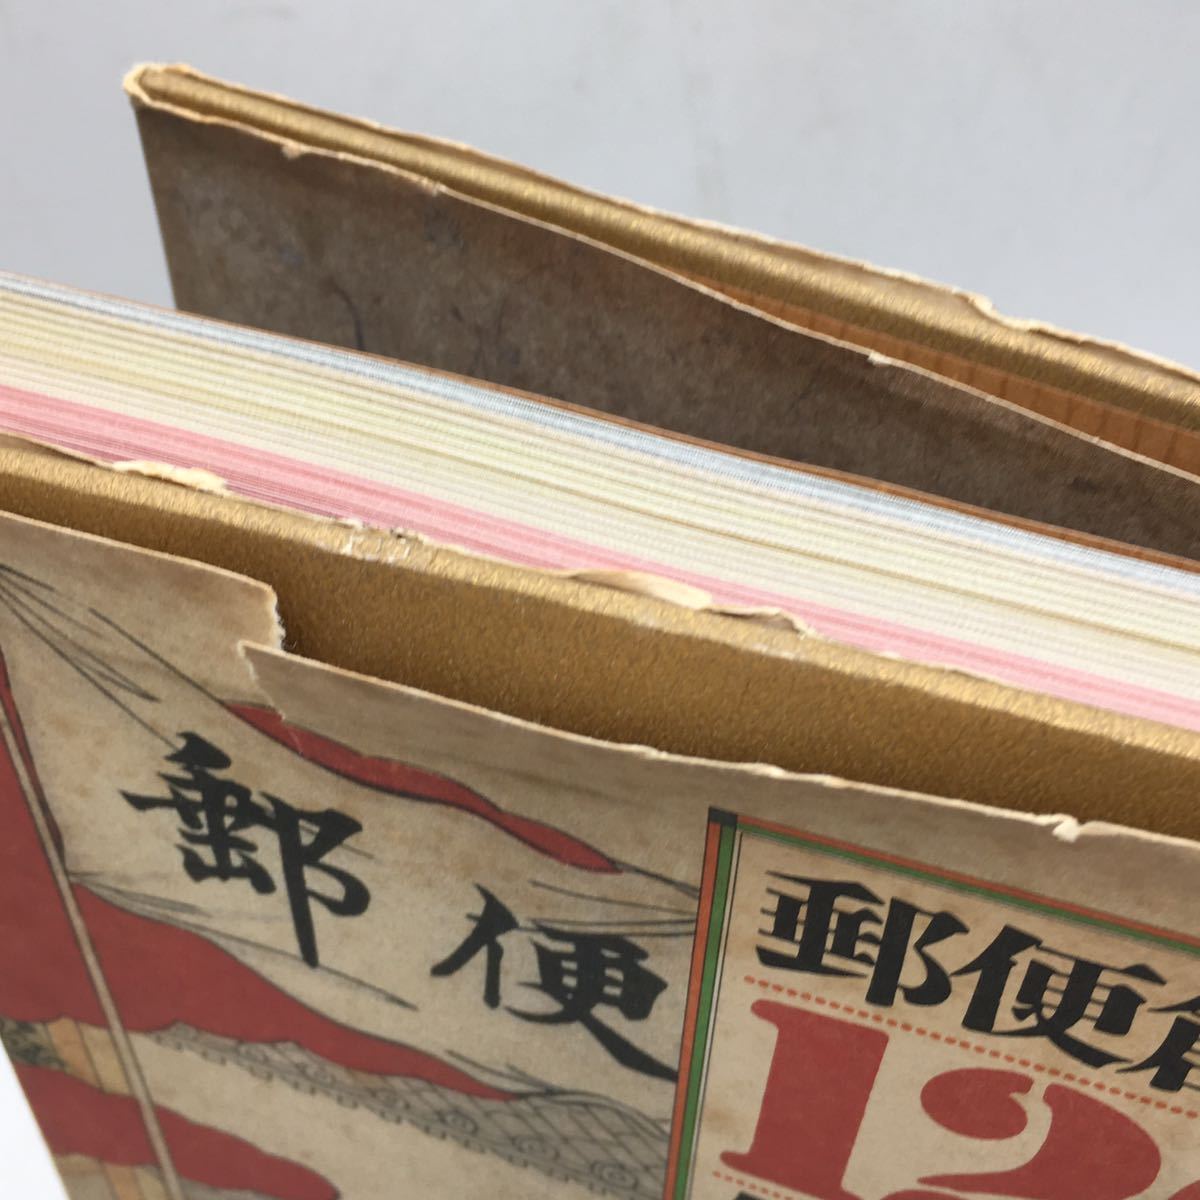 [..] mail establishment 120 year. history water . Light window. commentary booklet attaching postal ... department mail project history compilation .. Heisei era 3..... horse car railroad stamp writing .y0